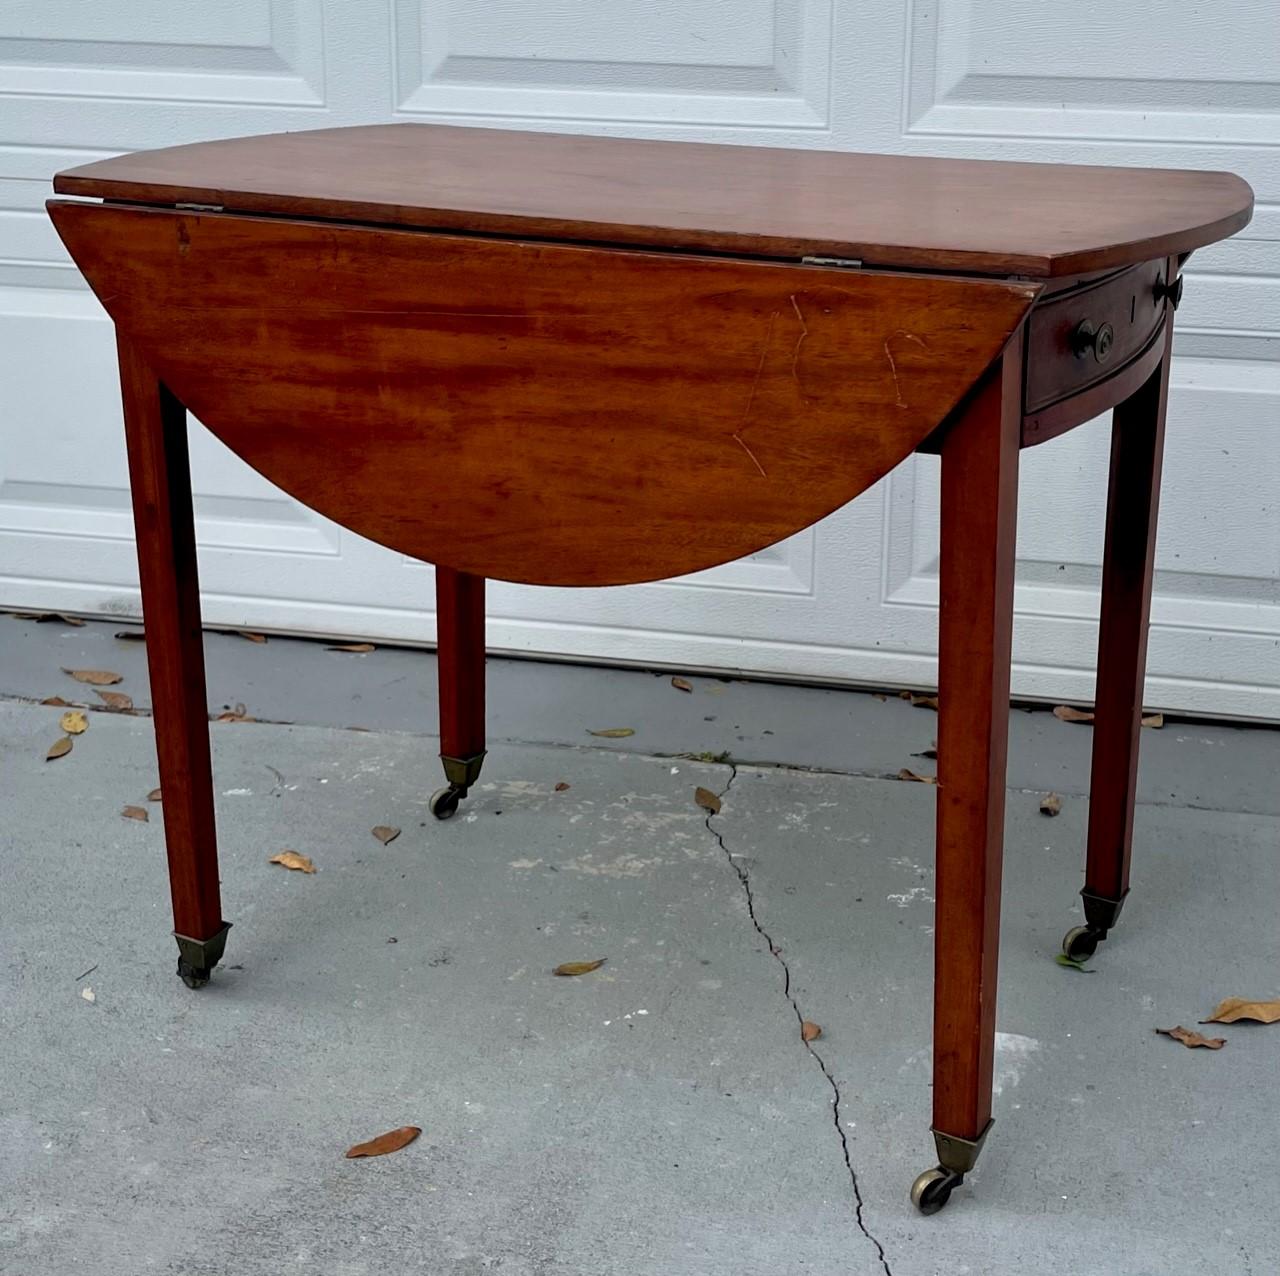 English Early 19th Century Mahogany Pembroke Table.

Early 19th century Mahogany oval occasional Pembroke table. It has two drop leaves, supported by hinged brackets over one single drawer with brass pulls. It sits above four tapering legs with